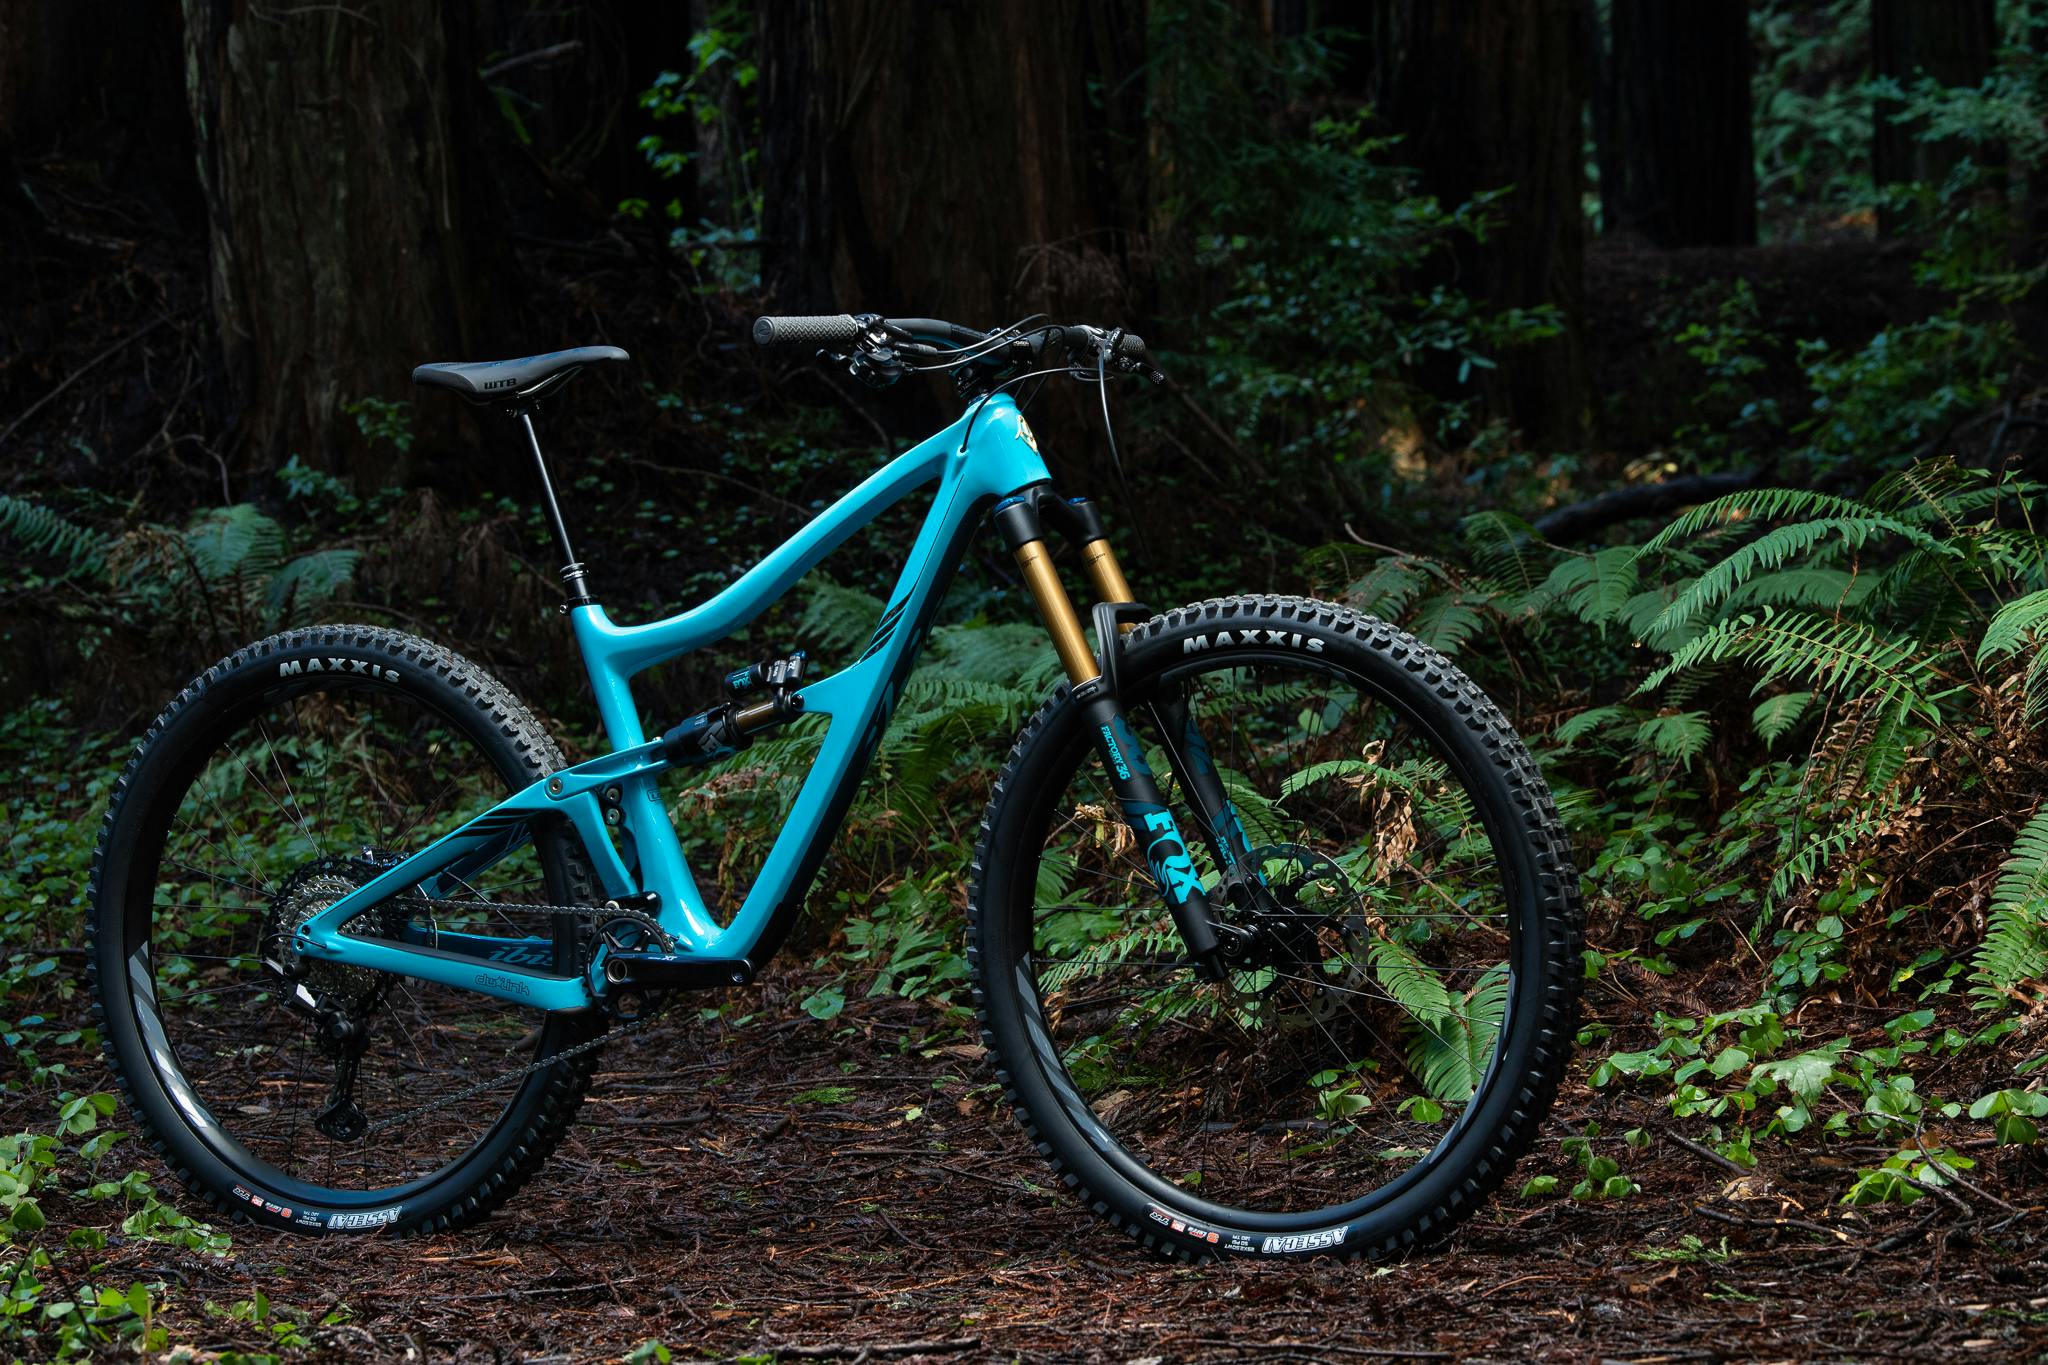 Ibis Cycles' Ripmo V2 mountain bike standing in the forest.